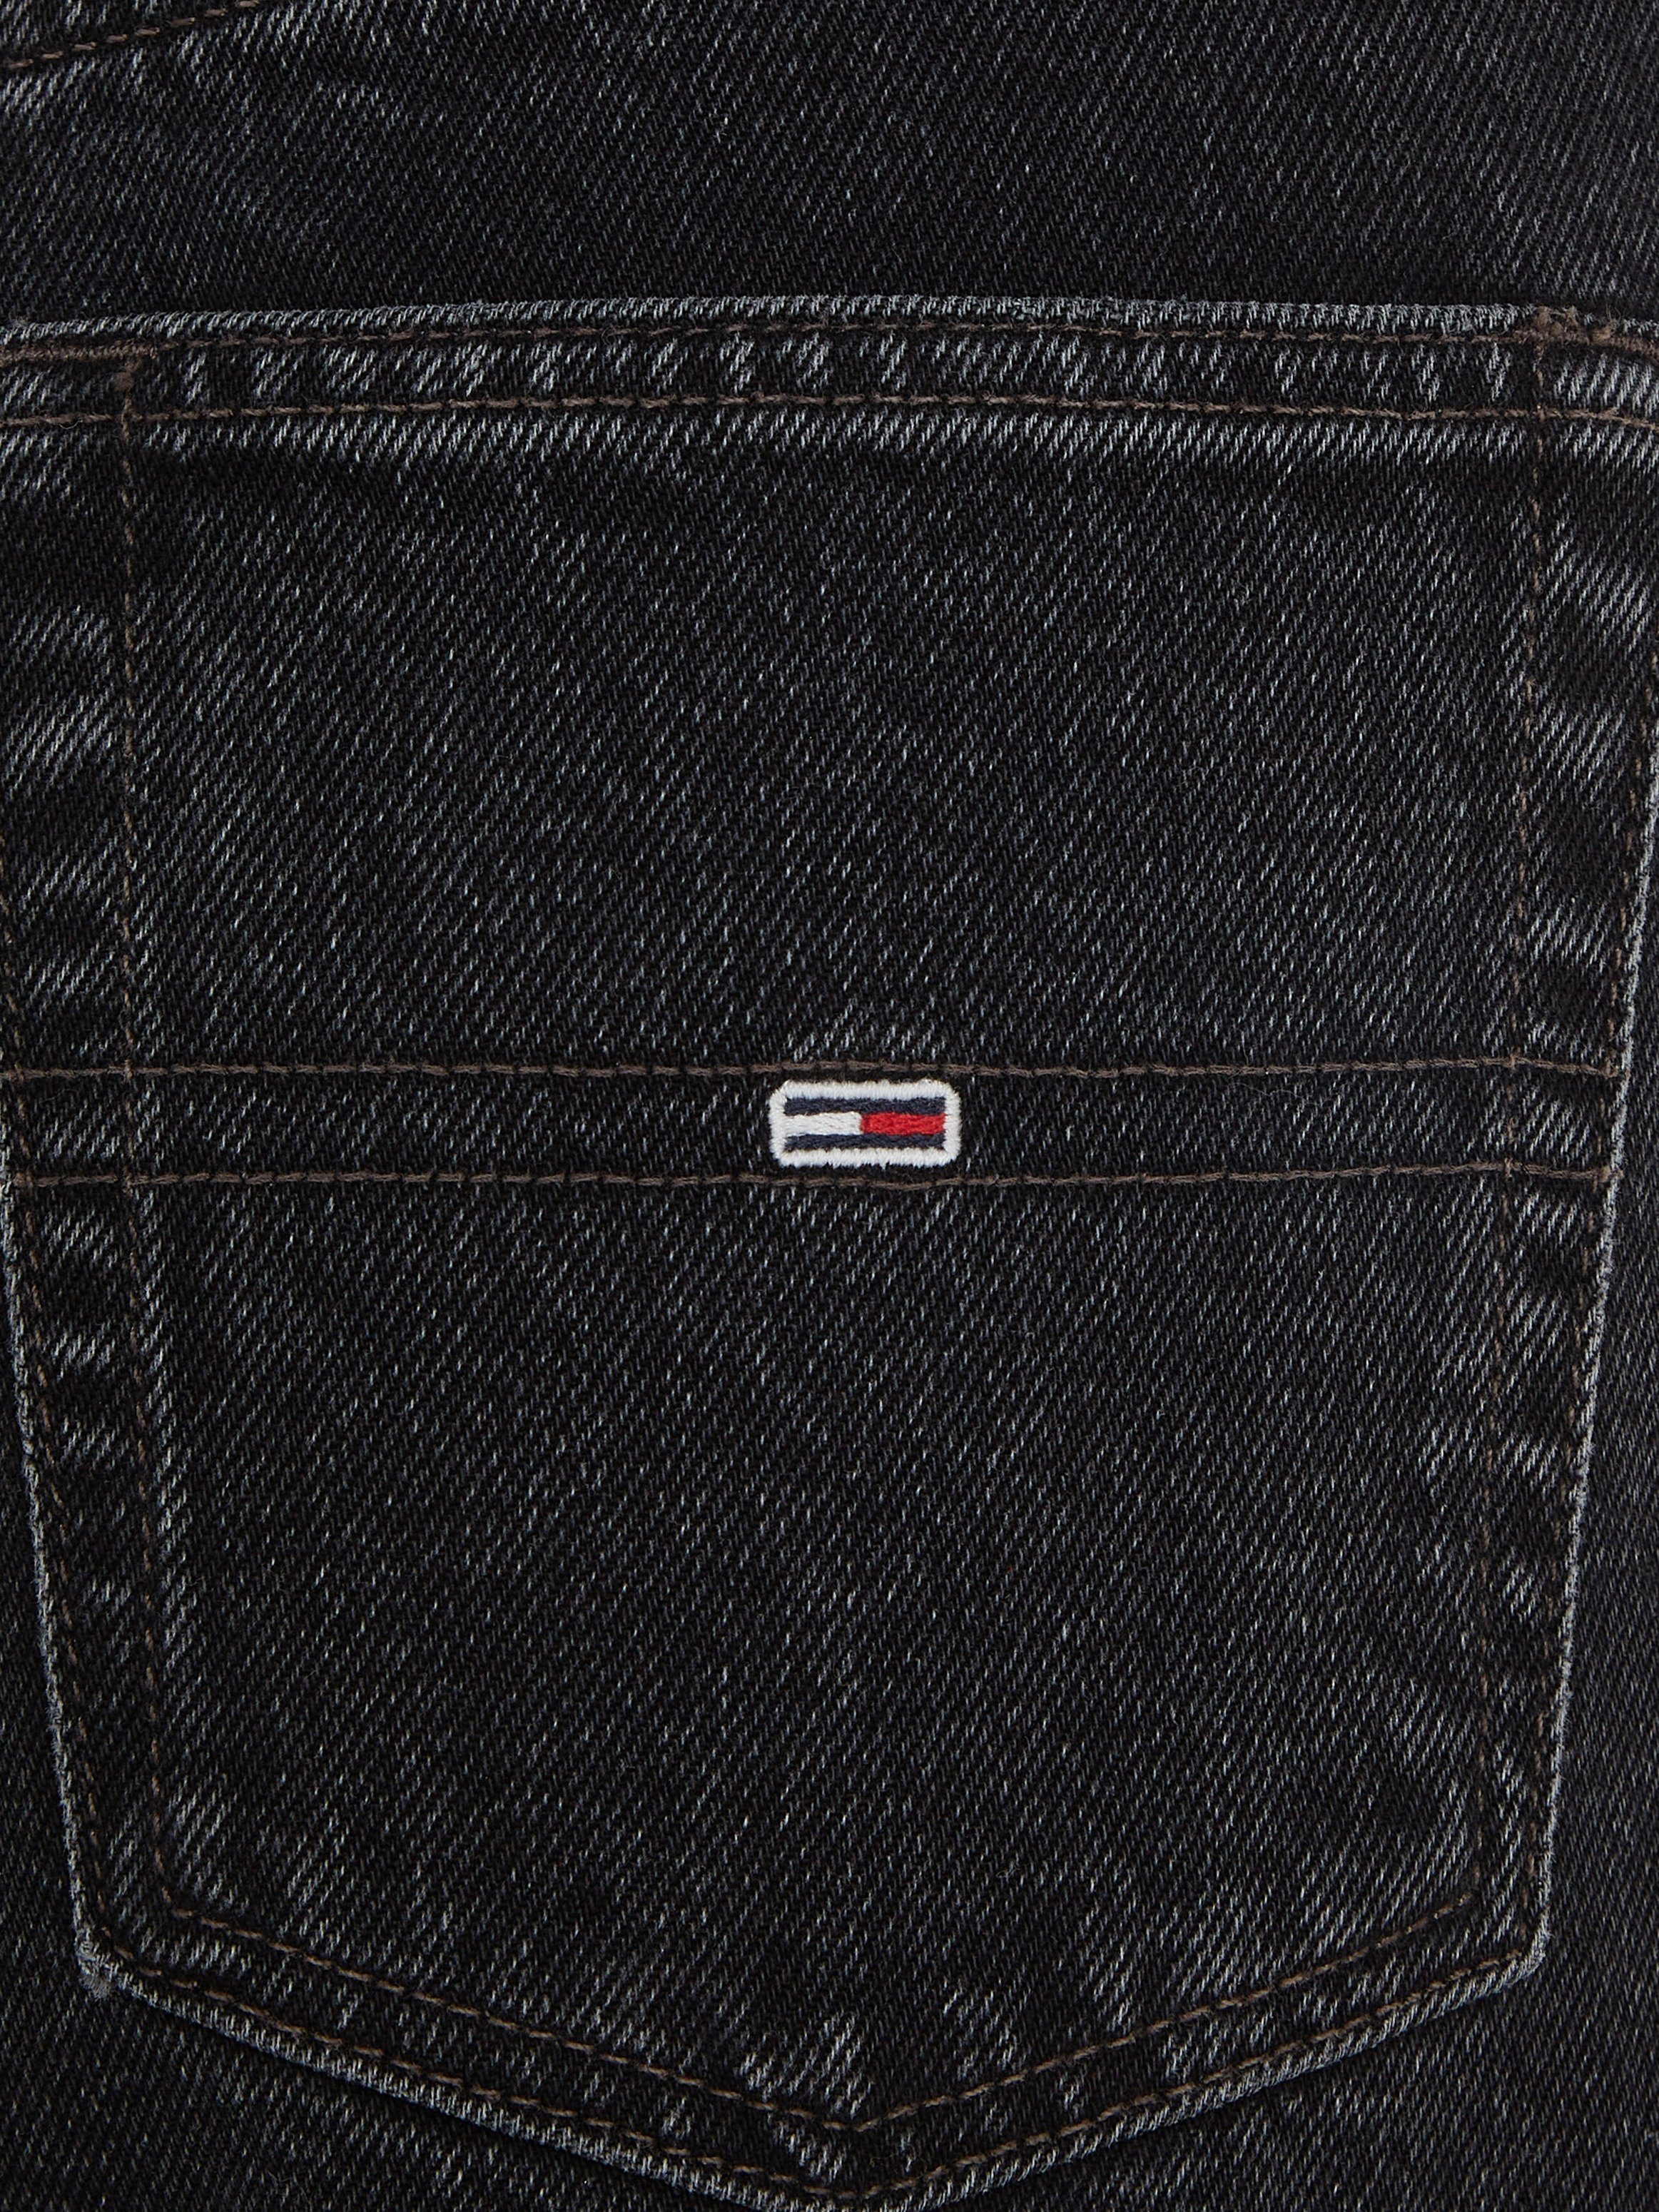 Jeans Jeans Jeans black Weite Tommy Logobadges mit Tommy